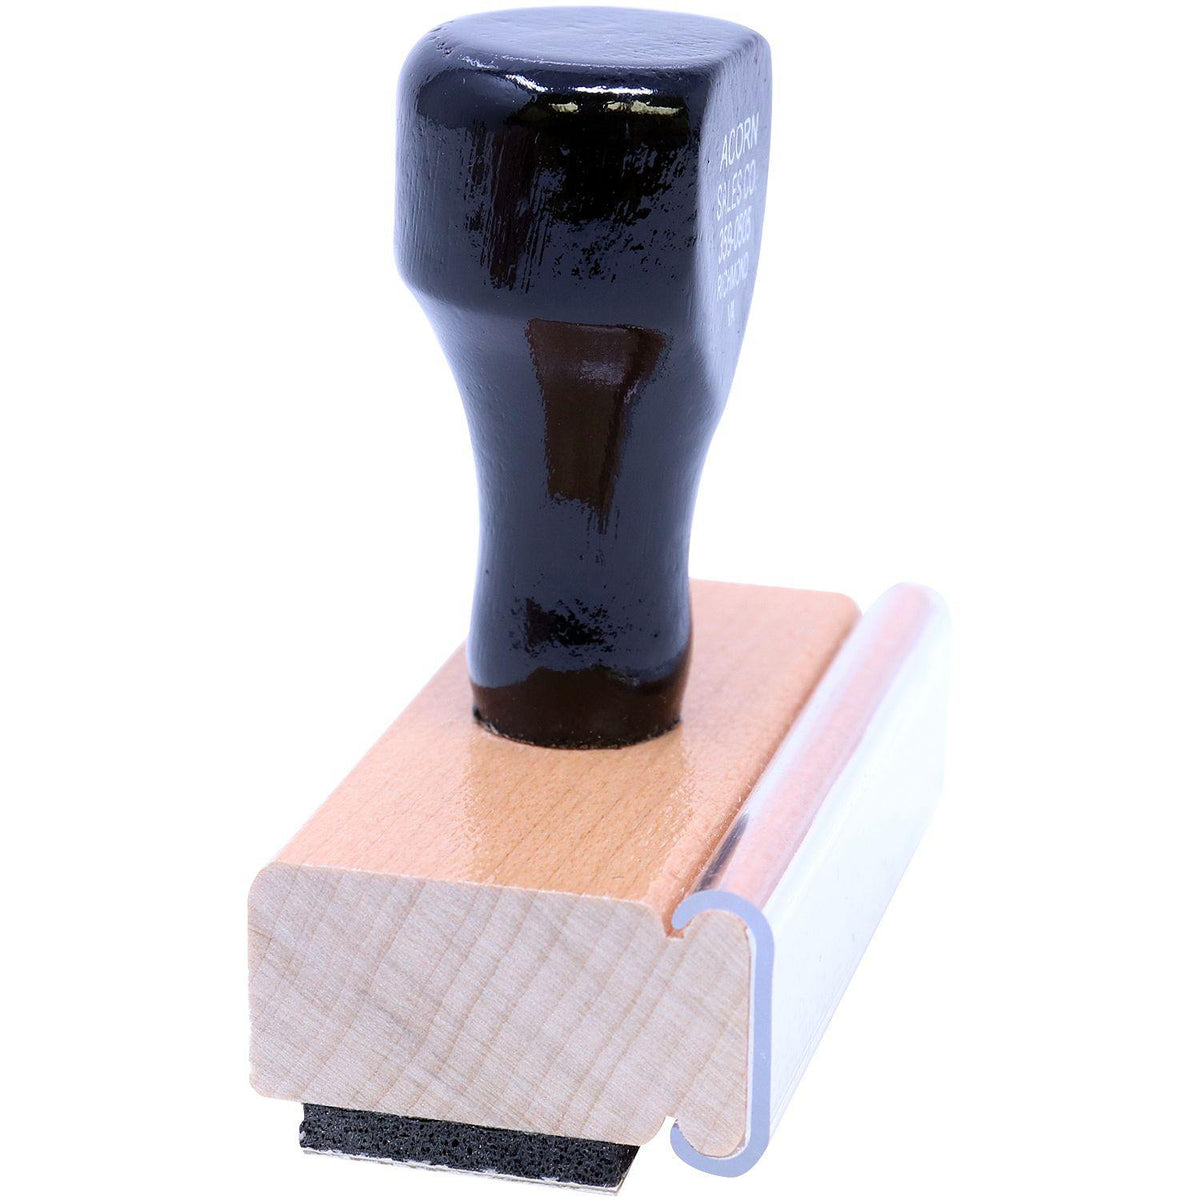 Side View of Large Parcel Post Economy Rubber Stamp at an Angle